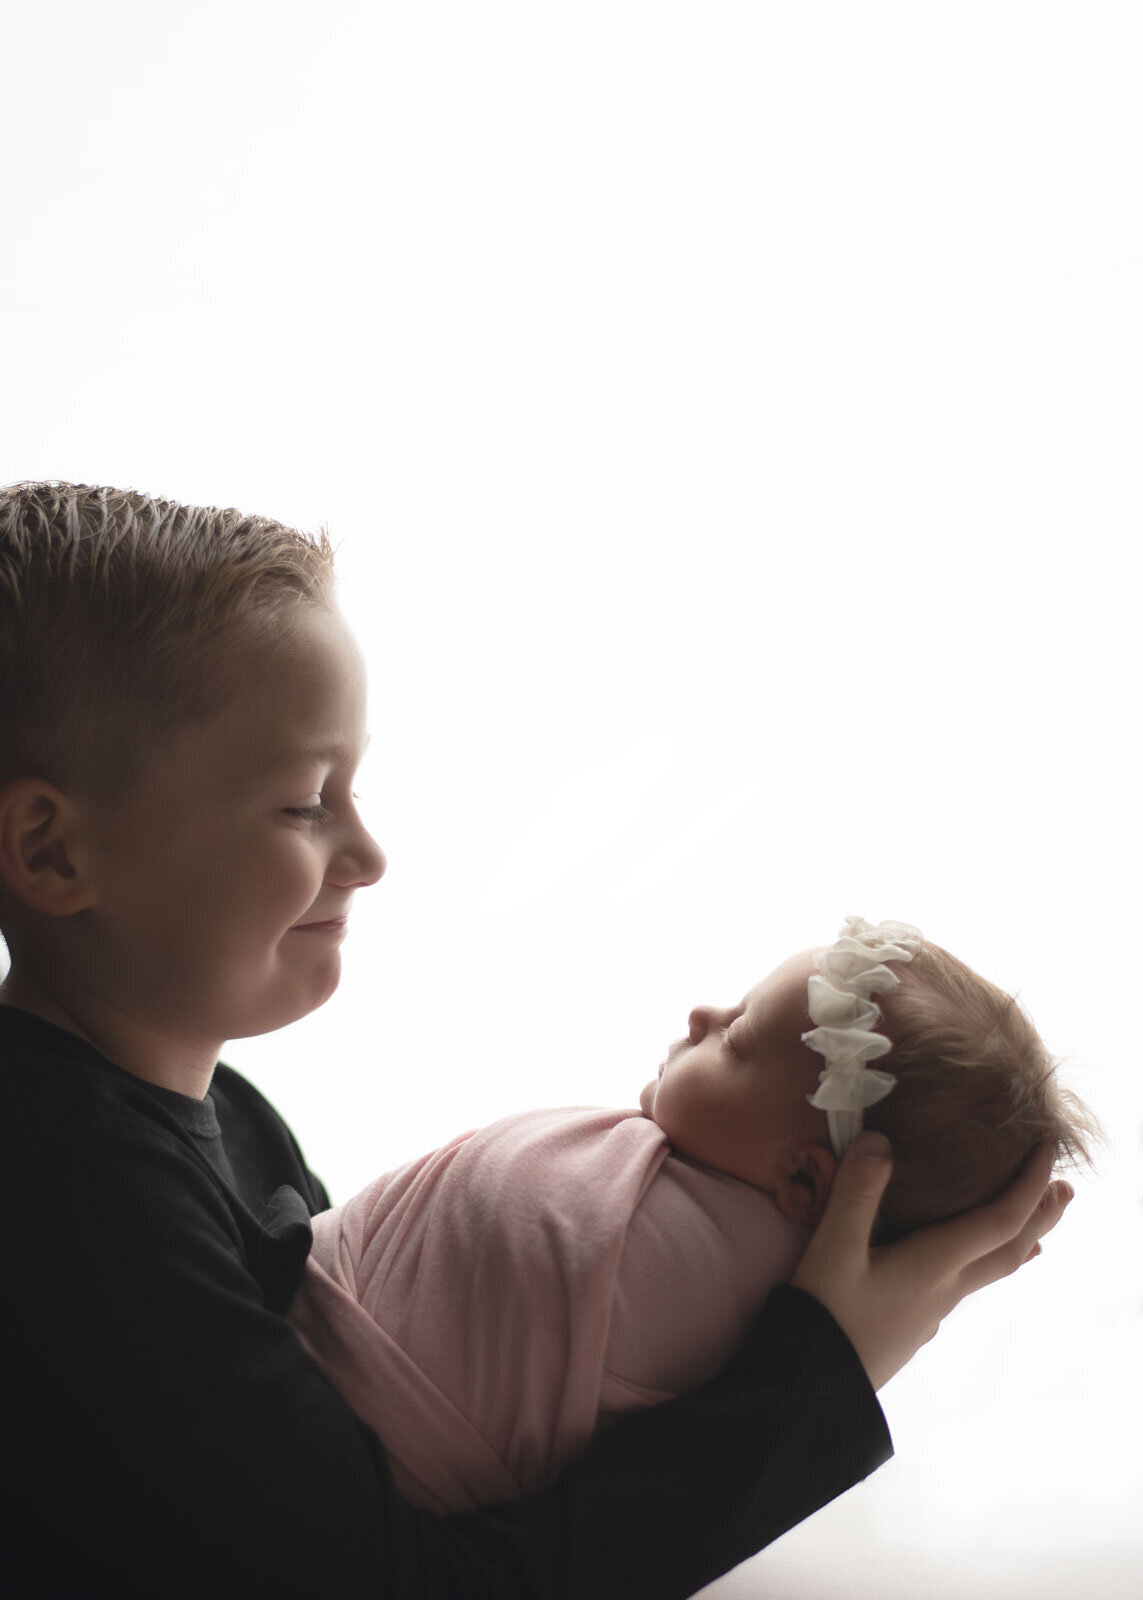 boy holding his baby sister who is wrapped in pink with a white headband. they are on a white background photo taken by sutherland photography, a st. louis newborn photographer